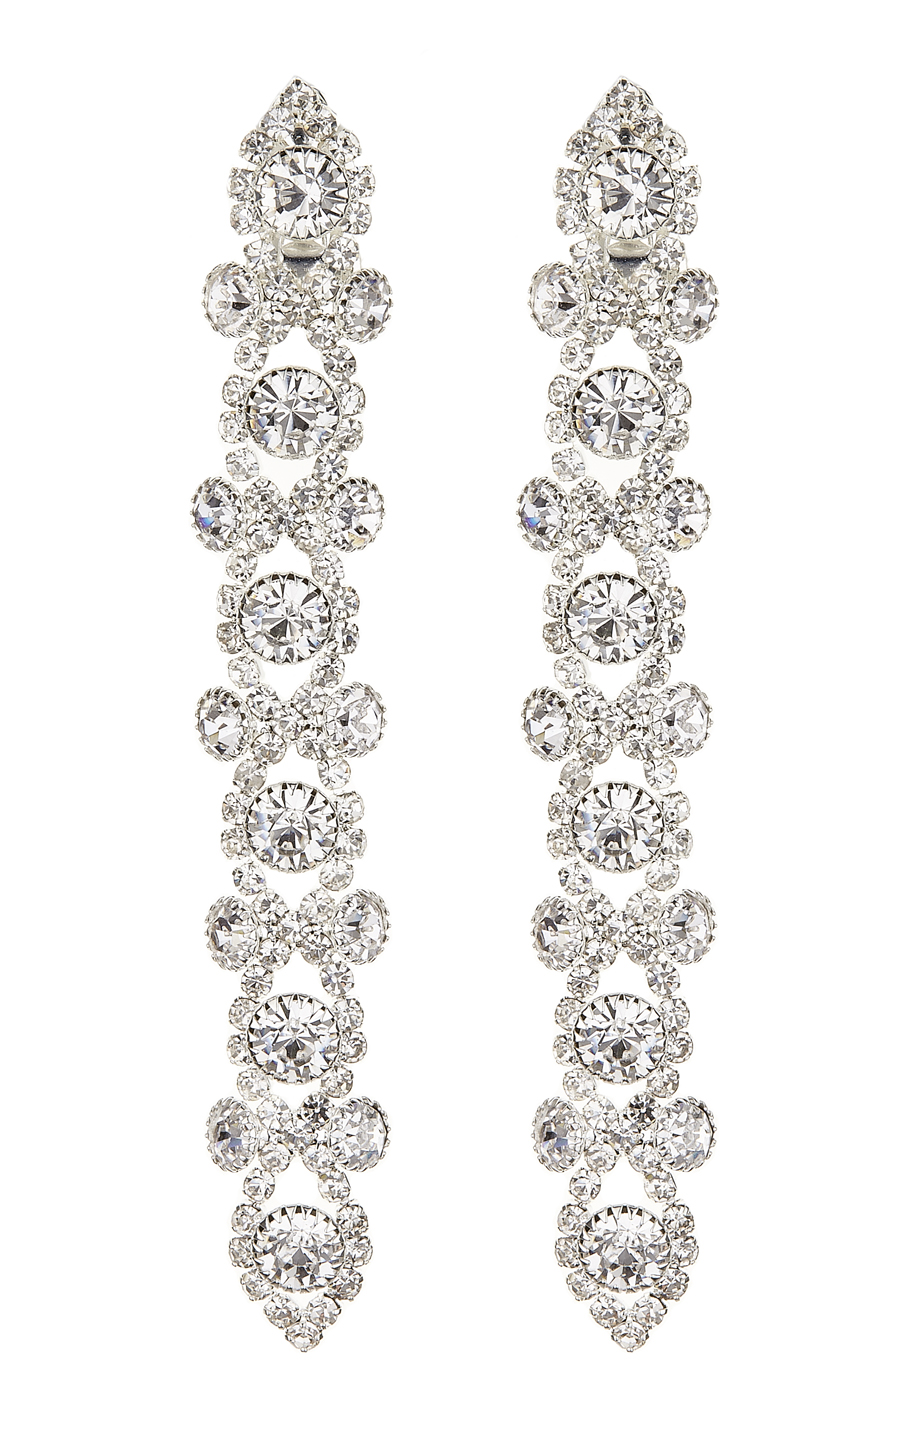 Clip On Earrings - Cassidy S - silver drop earring with clear crystals